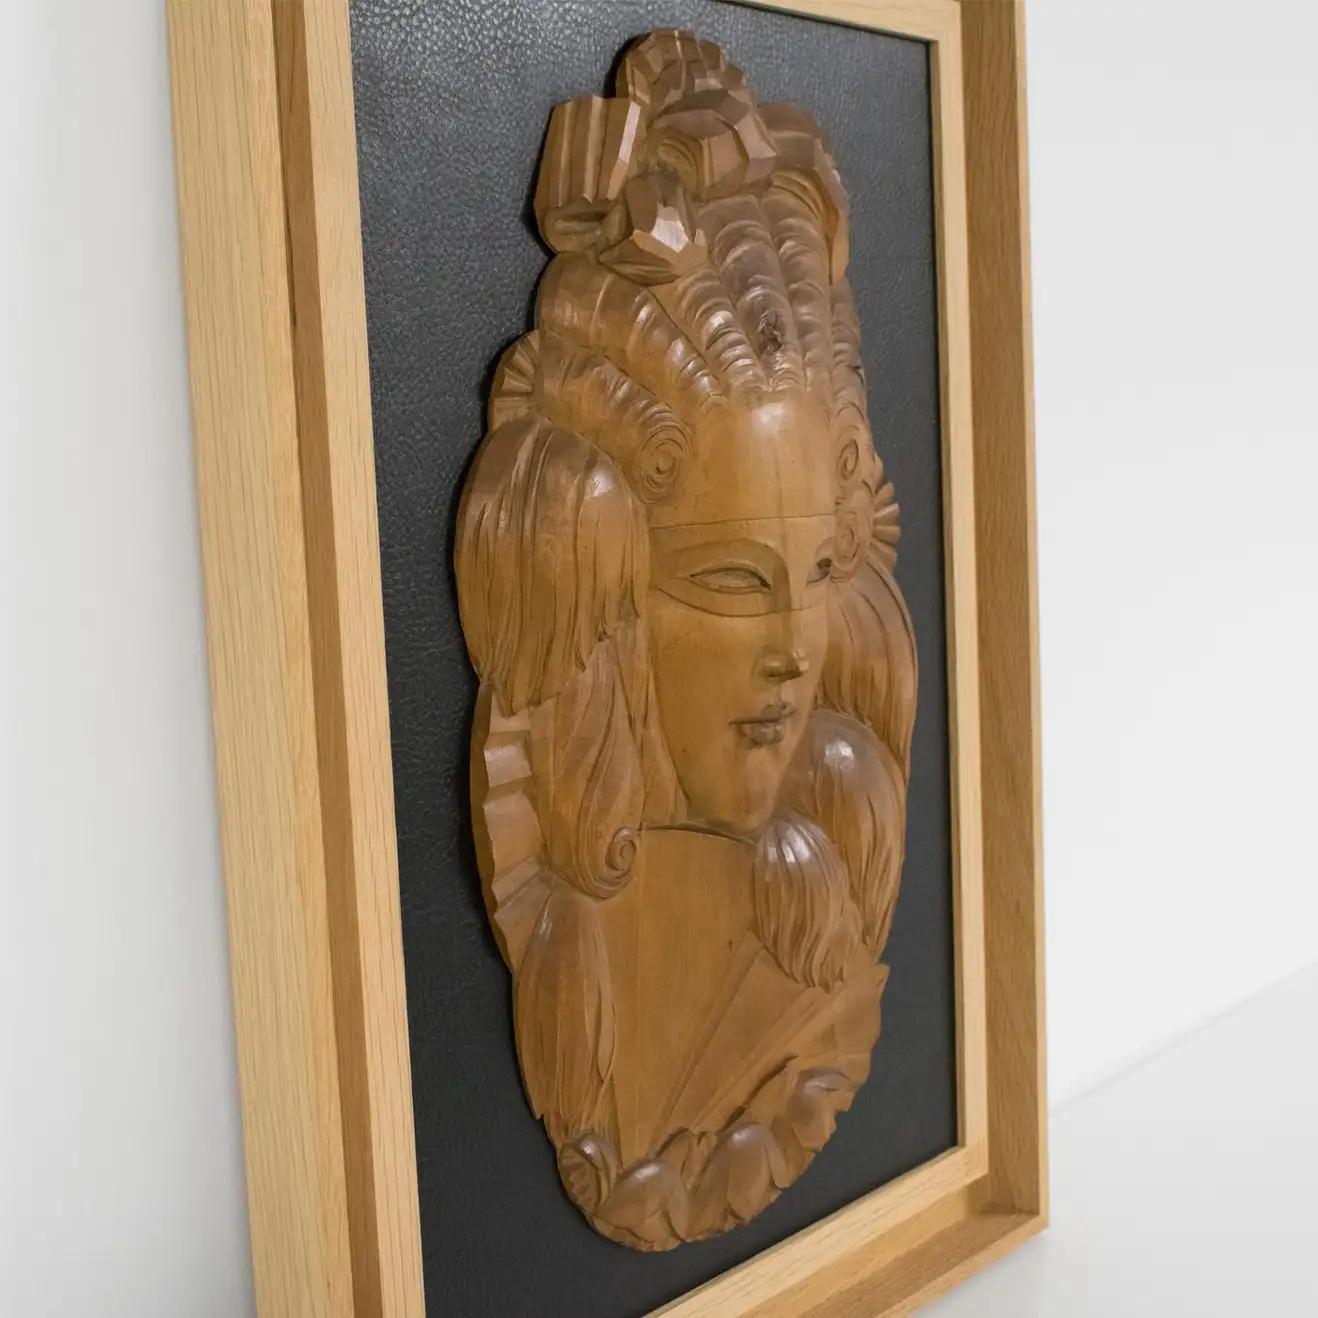 Mid-20th Century Art Deco Handcrafted Wood Panel Wall Sculpture Venetian Mask, 1930s For Sale